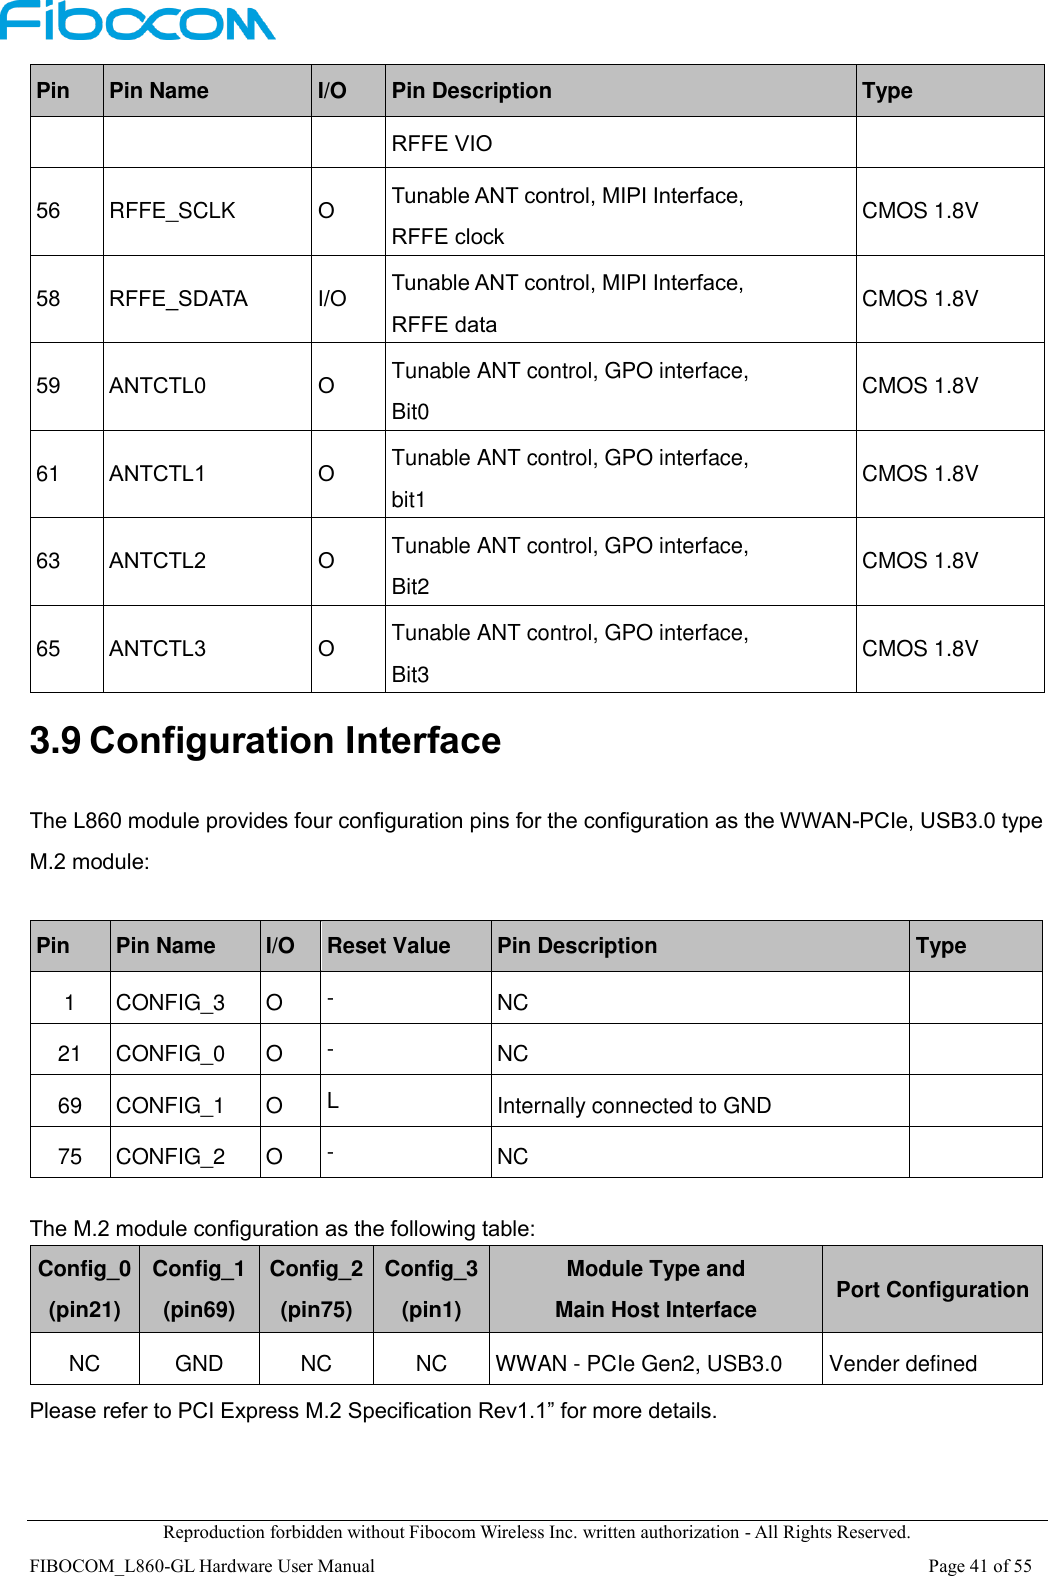  Reproduction forbidden without Fibocom Wireless Inc. written authorization - All Rights Reserved. FIBOCOM_L860-GL Hardware User Manual                                                                                                                      Page 41 of 55 Pin   Pin Name   I/O Pin Description   Type   RFFE VIO 56 RFFE_SCLK O Tunable ANT control, MIPI Interface,   RFFE clock CMOS 1.8V 58 RFFE_SDATA I/O Tunable ANT control, MIPI Interface,   RFFE data CMOS 1.8V 59 ANTCTL0 O Tunable ANT control, GPO interface,   Bit0 CMOS 1.8V 61 ANTCTL1 O Tunable ANT control, GPO interface,   bit1 CMOS 1.8V 63 ANTCTL2 O Tunable ANT control, GPO interface,   Bit2 CMOS 1.8V 65 ANTCTL3 O Tunable ANT control, GPO interface,   Bit3 CMOS 1.8V 3.9 Configuration Interface The L860 module provides four configuration pins for the configuration as the WWAN-PCIe, USB3.0 type M.2 module:  Pin   Pin Name   I/O Reset Value Pin Description   Type   1 CONFIG_3 O - NC  21 CONFIG_0 O - NC  69 CONFIG_1 O L Internally connected to GND  75 CONFIG_2 O - NC   The M.2 module configuration as the following table: Config_0 (pin21) Config_1 (pin69) Config_2 (pin75) Config_3 (pin1) Module Type and   Main Host Interface Port Configuration NC GND NC NC WWAN - PCIe Gen2, USB3.0   Vender defined Please refer to PCI Express M.2 Specification Rev1.1” for more details.  